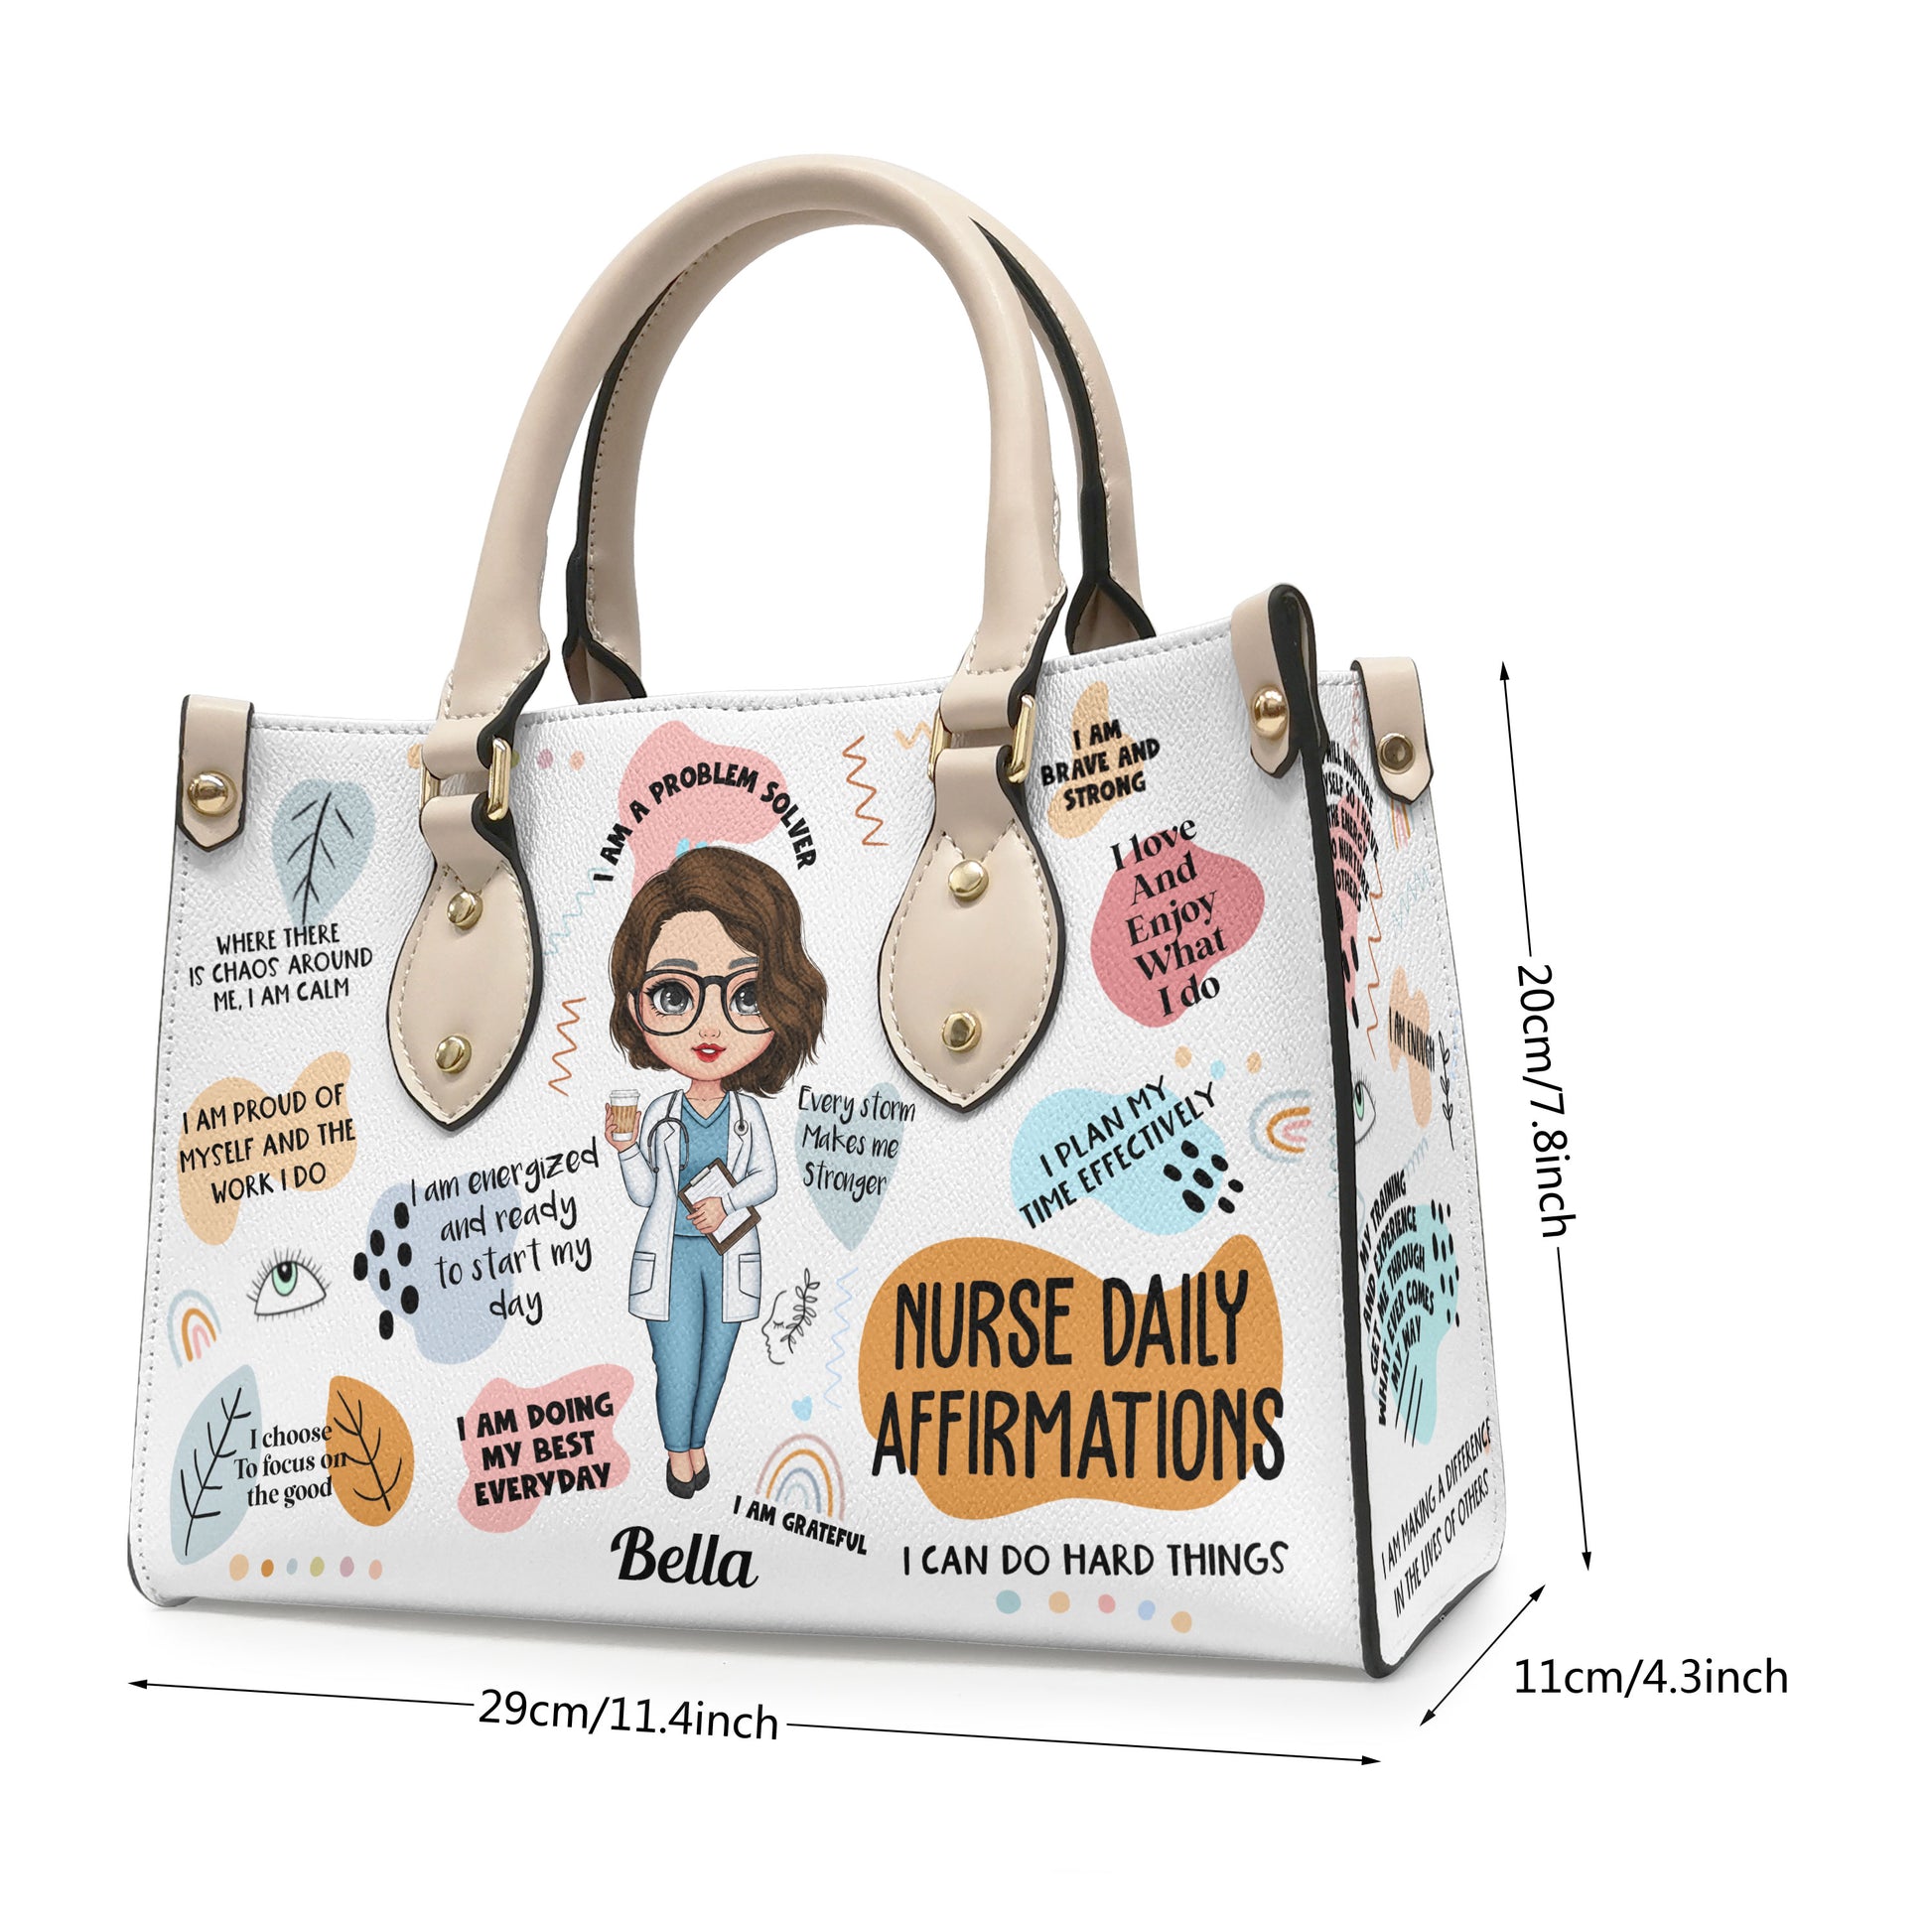 Retired Nurse Personalized Leather Bag